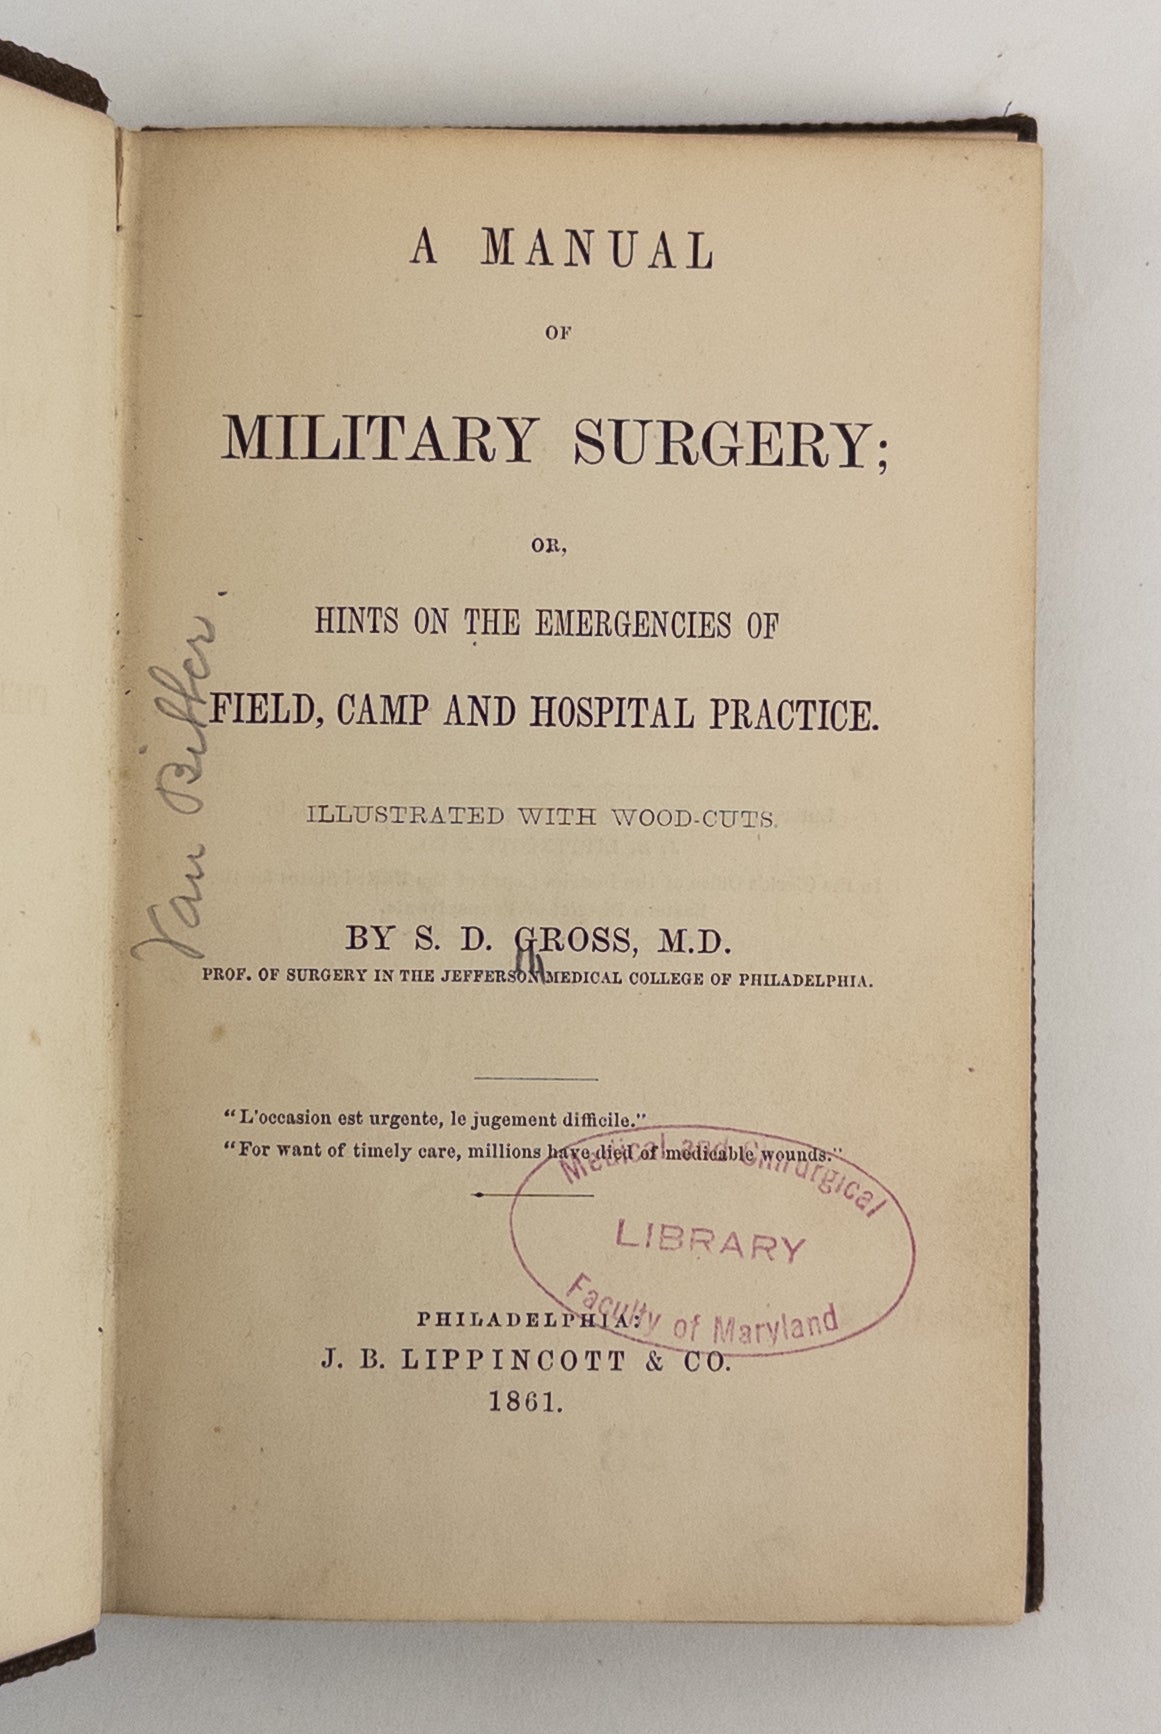 Product Image for A MANUAL OF MILITARY SURGERY; OR, HINTS ON THE EMERGENCIES OF FIELD, CAMP AND HOSPITAL PRACTICE. ILLUSTRATED WITH WOOD-CUTS